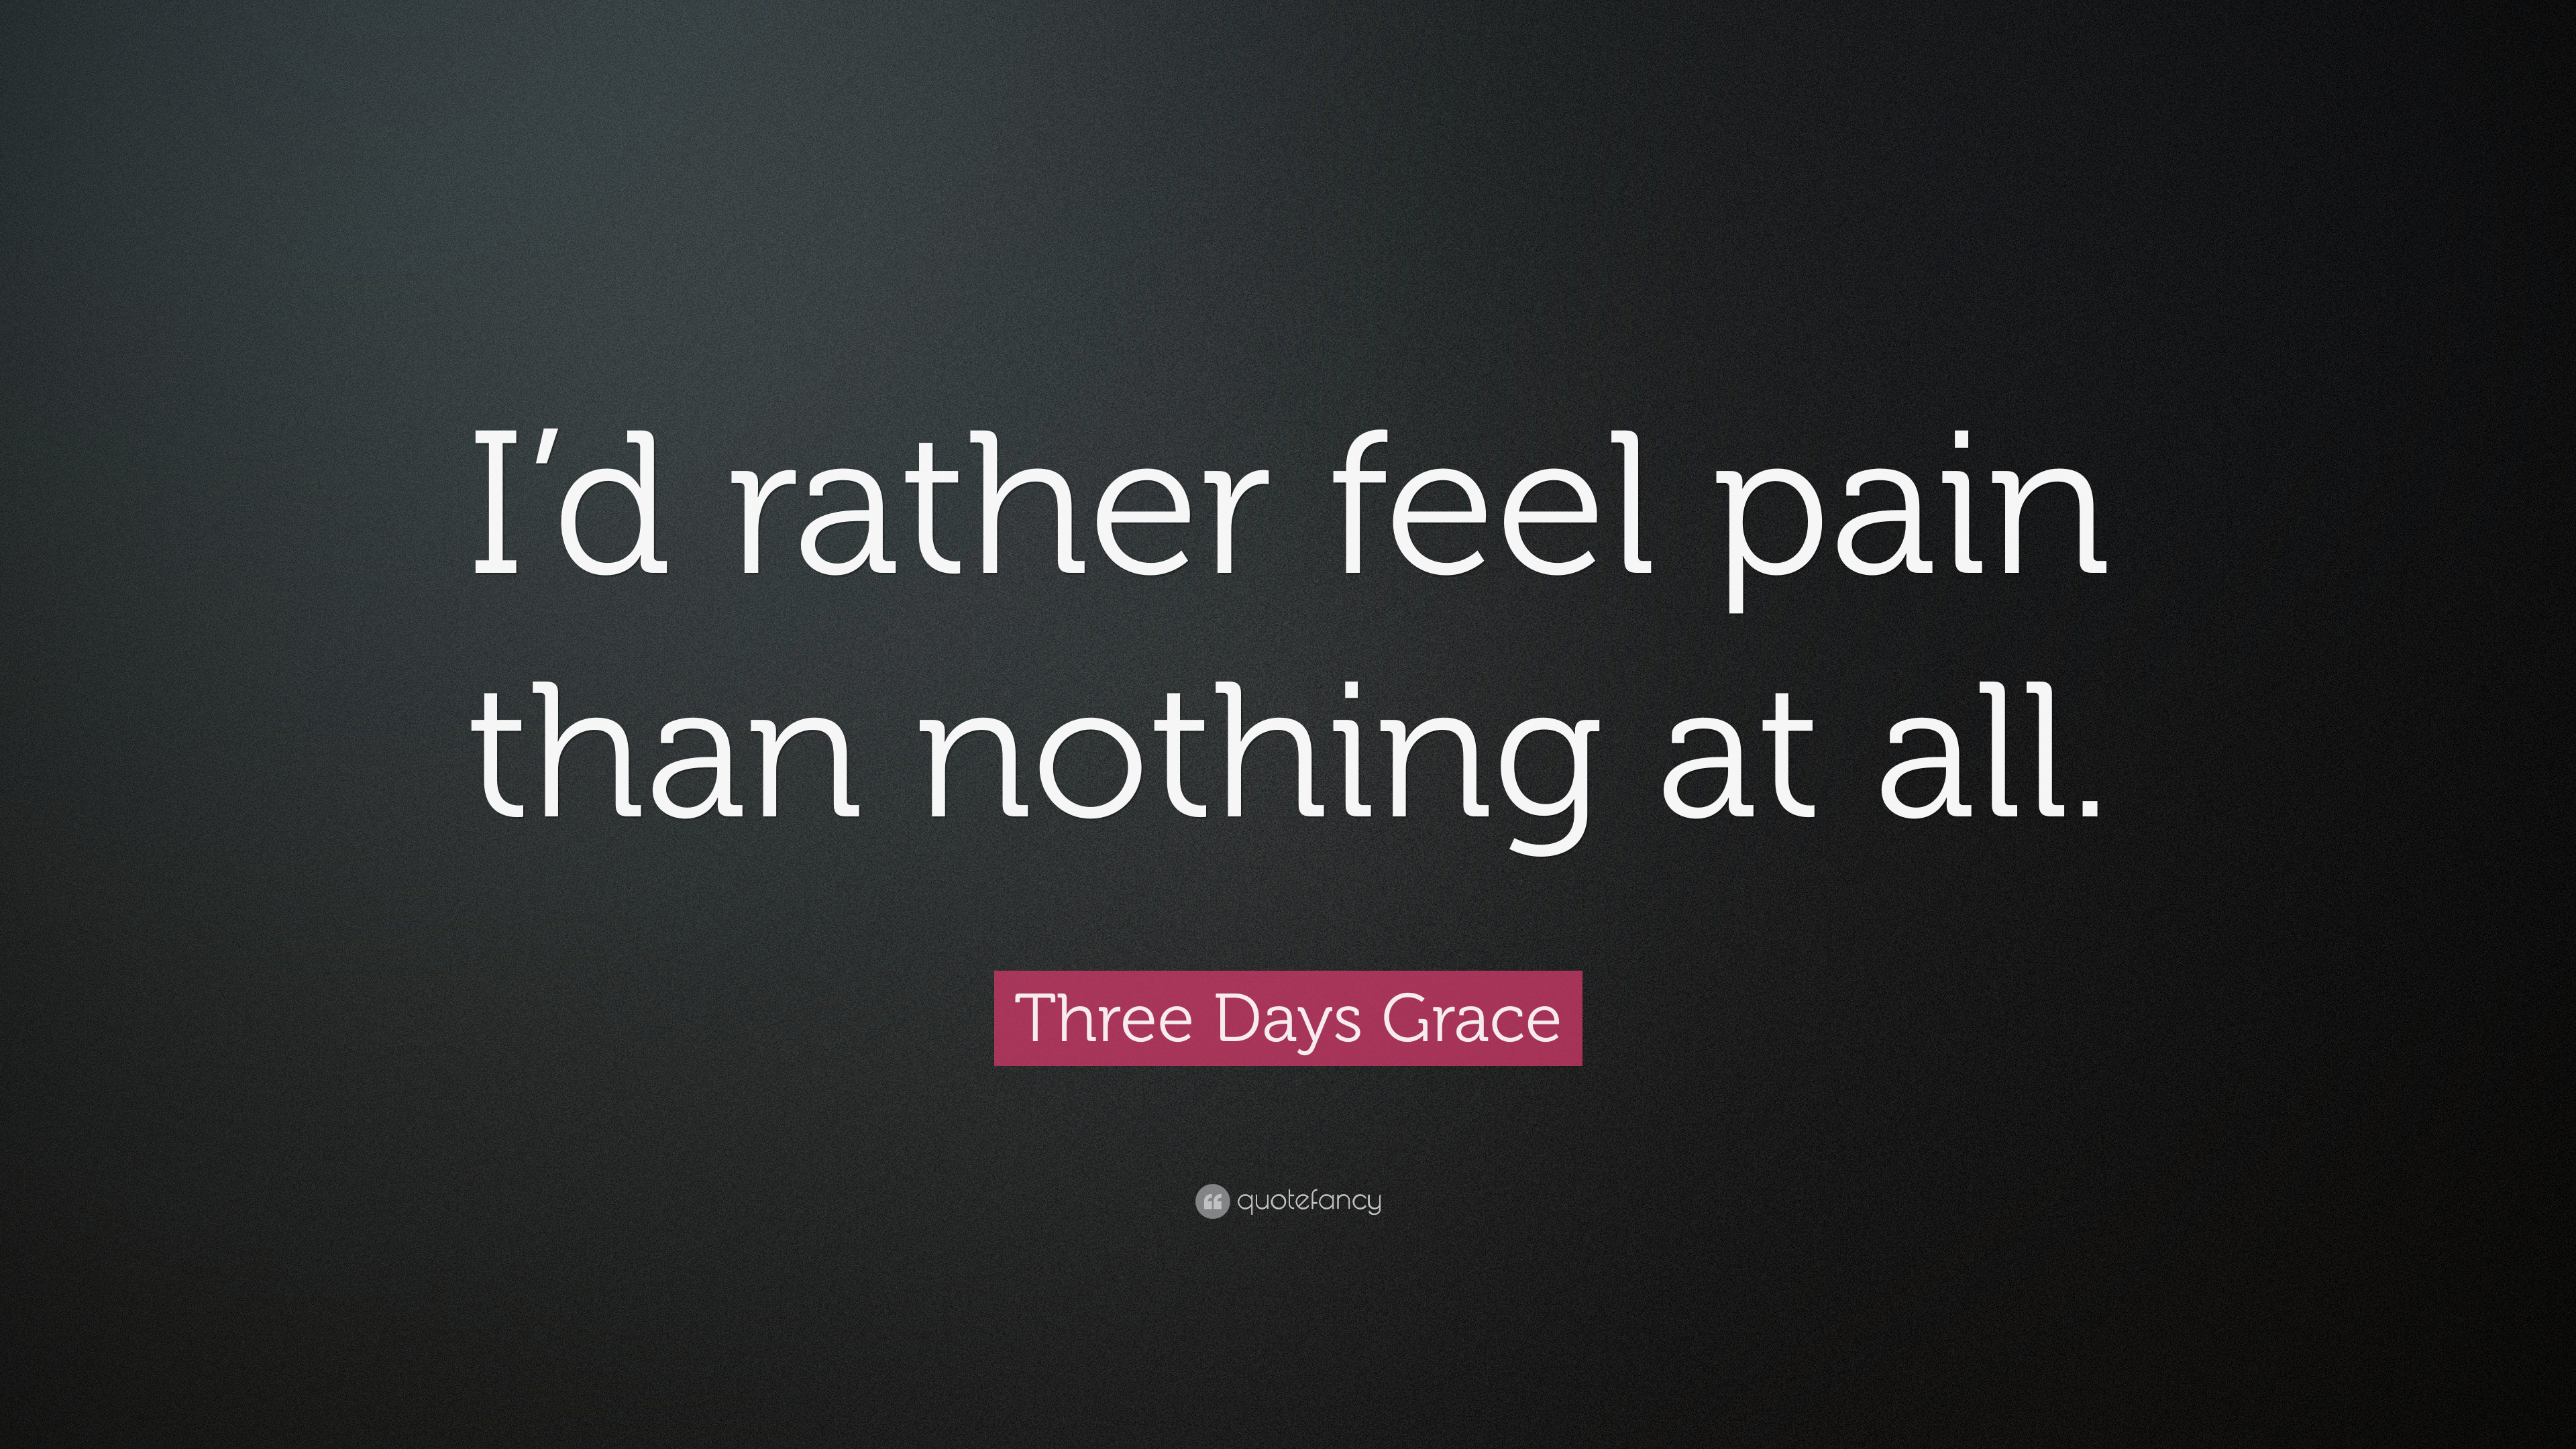 3840x2160 Three Days Grace Quote: “I'd rather feel pain than nothing at all